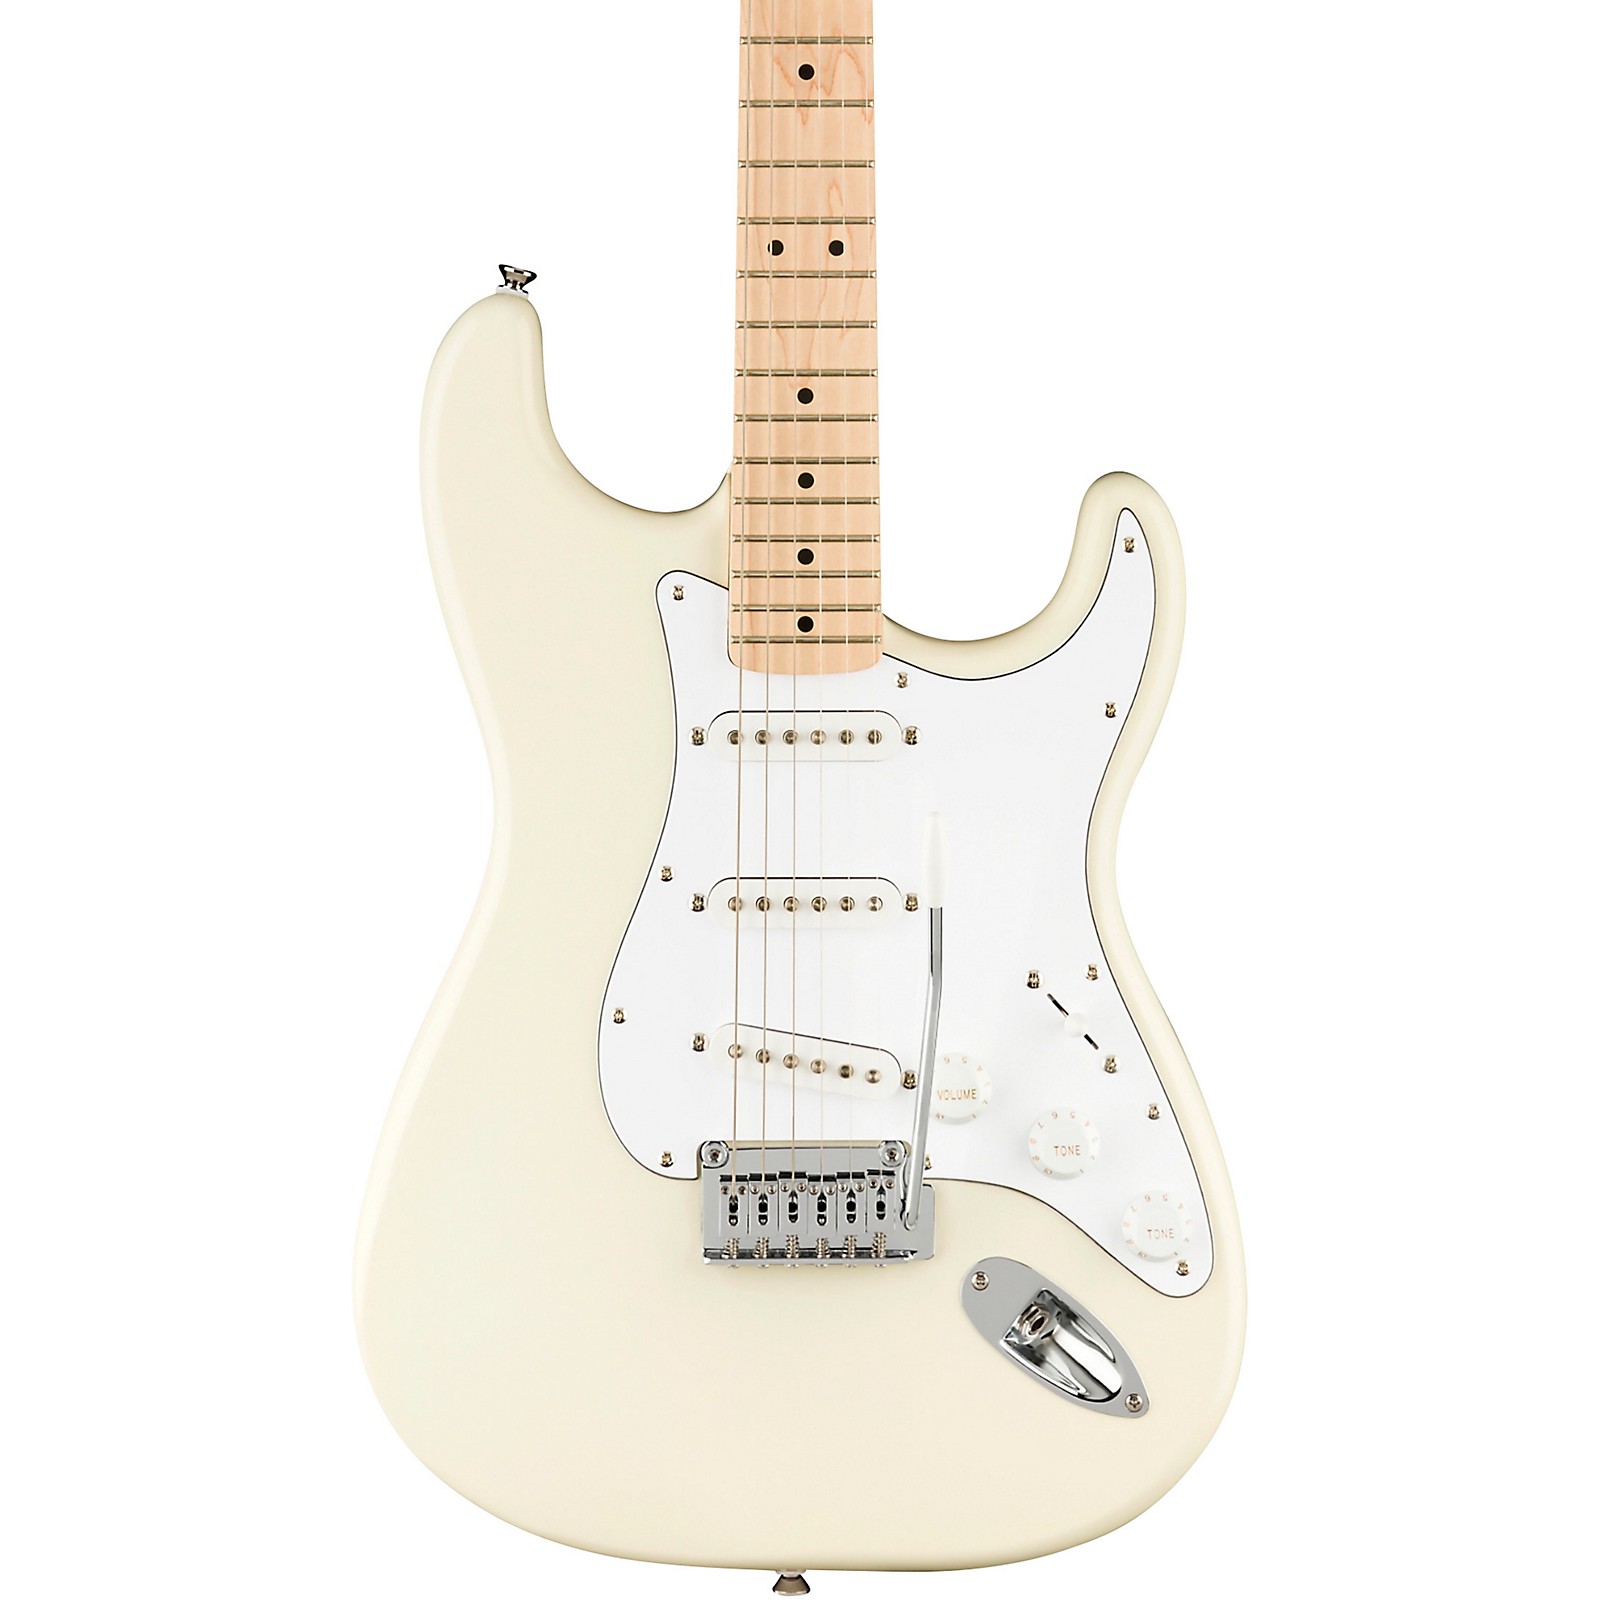 Squier Affinity Series Stratocaster Maple Fingerboard Electric